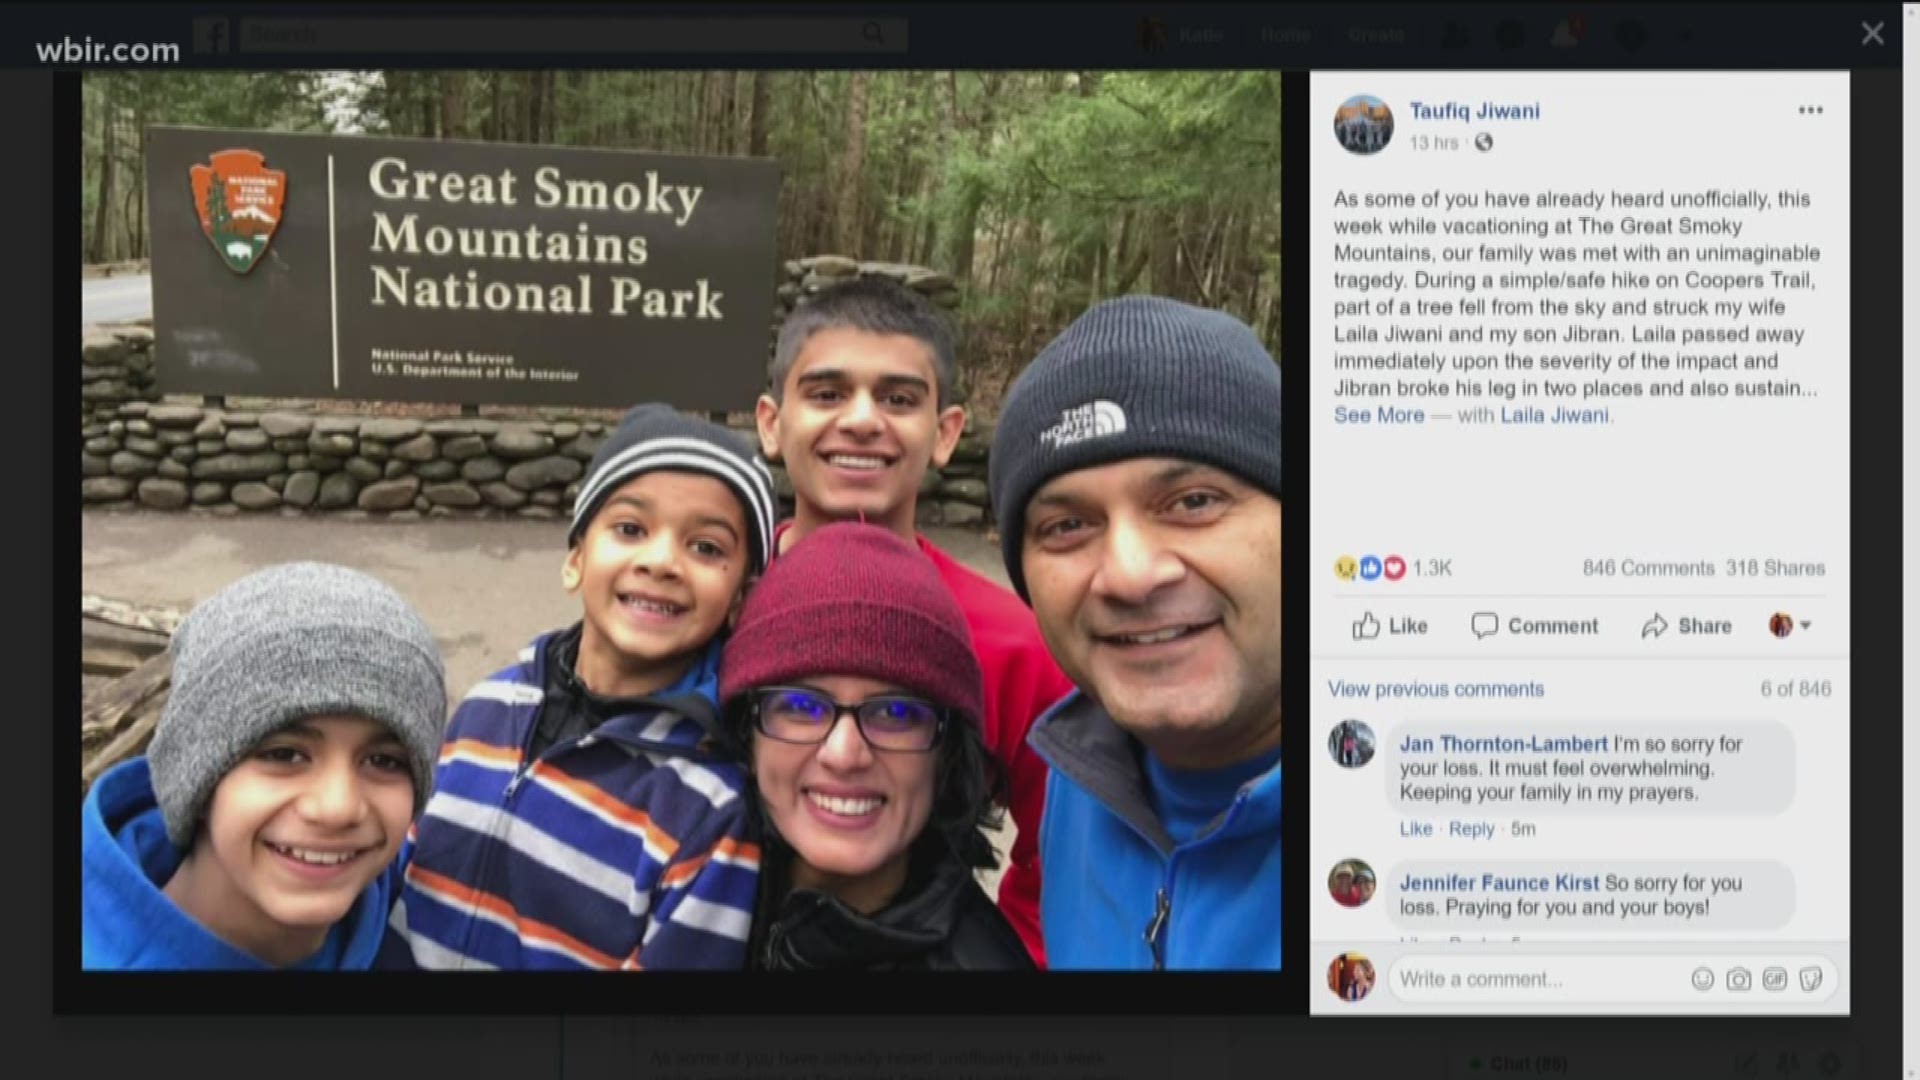 High winds knocked over a tree at GSMNP, which killed a woman while she was hiking with her family.